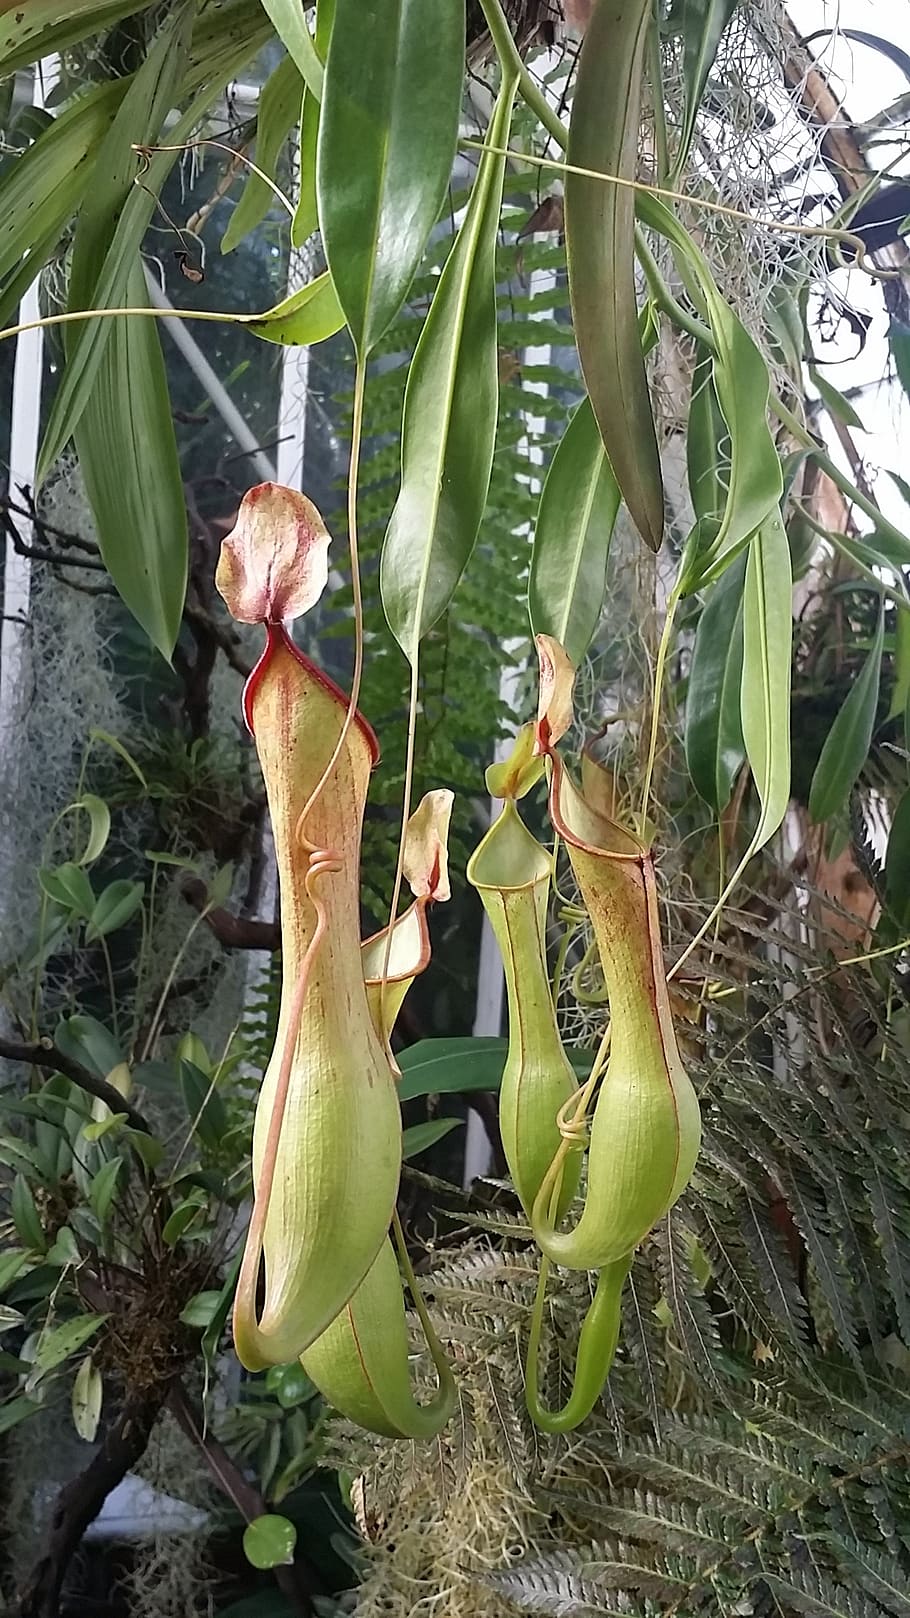 pitcher plant, fly trap, pitcher, fly, carnivorous, tropical, flower, plant, trap, insect